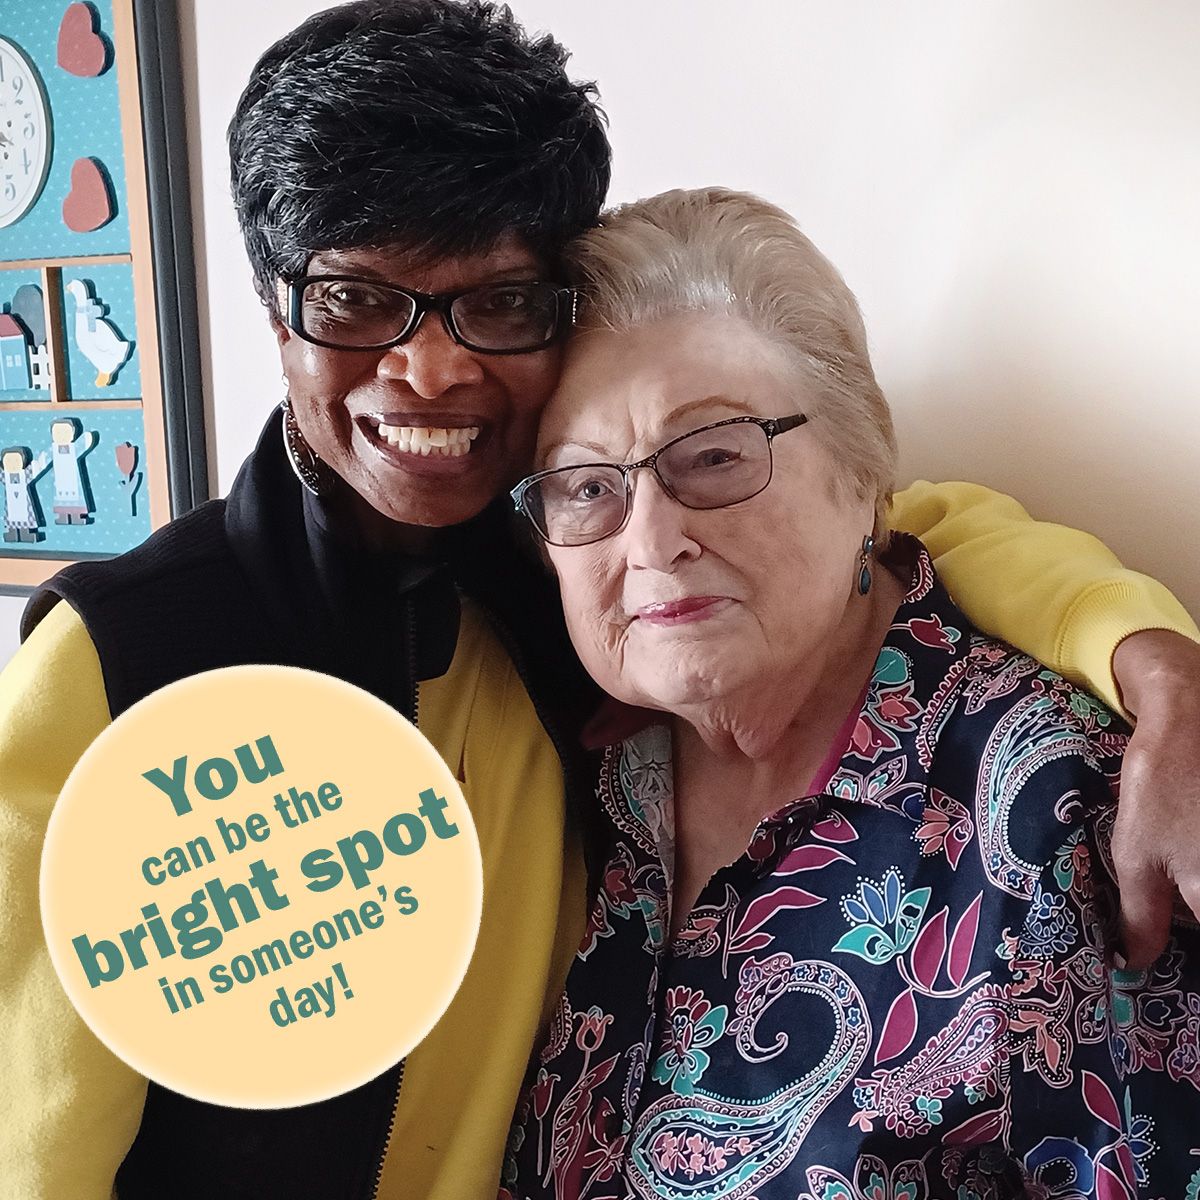 2 women embracing. Text: You can be the bright spot in someone's day!